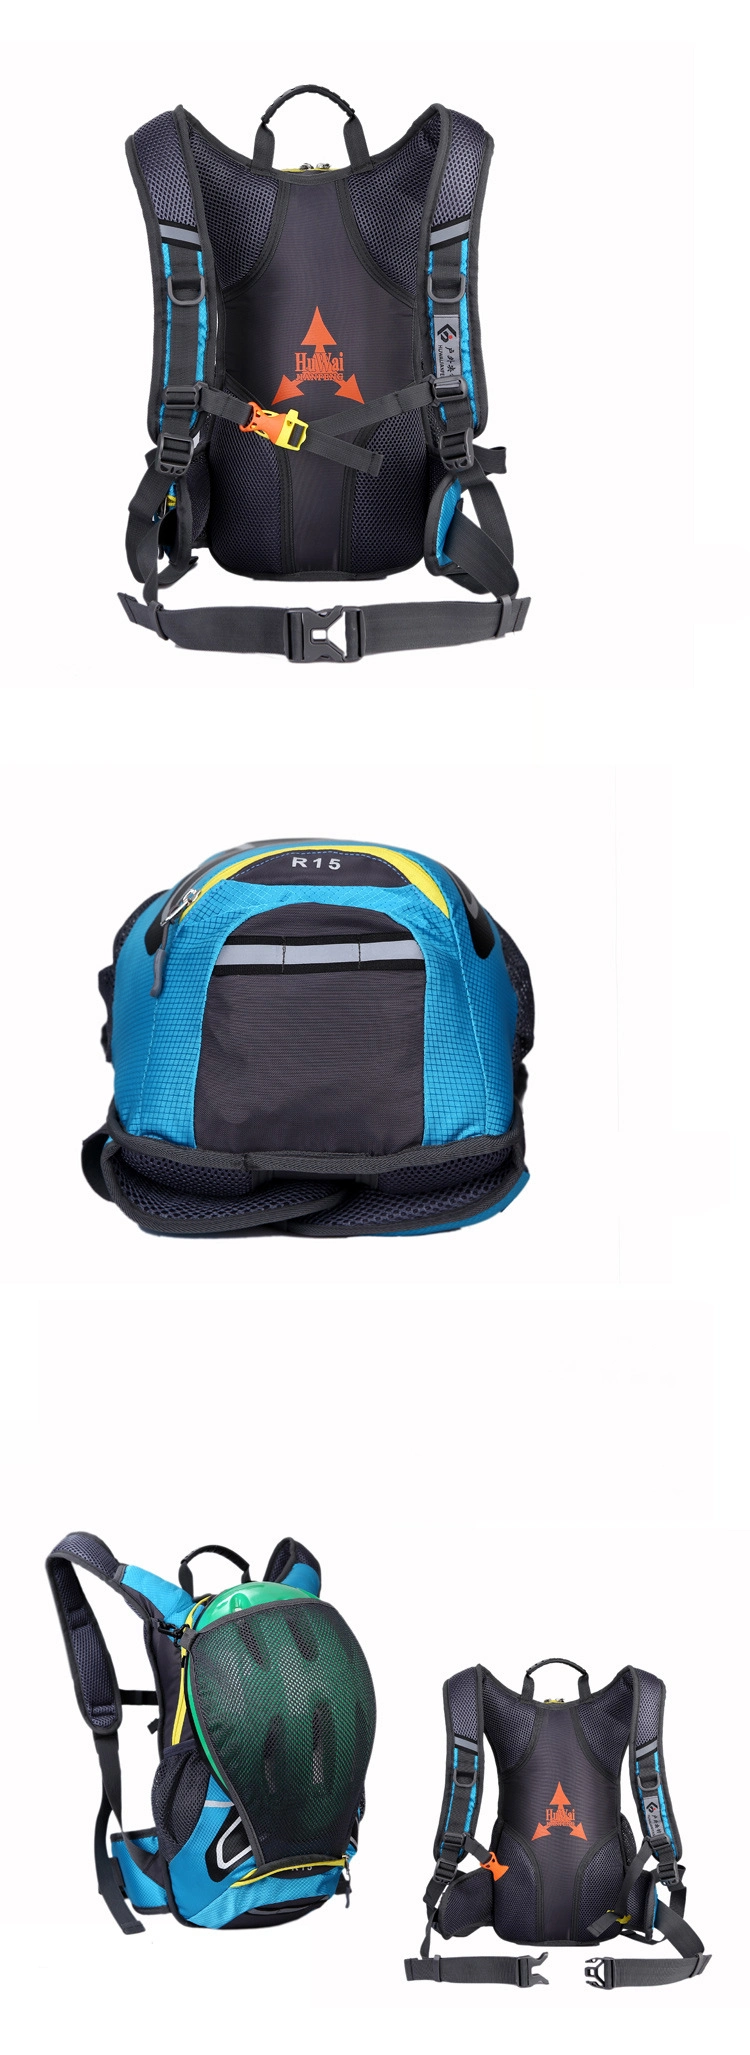 Backpack Riding Backpack with Basketball Net Bicycle Outdoor Travel Water Bag Riding Bag Hydration Backpack